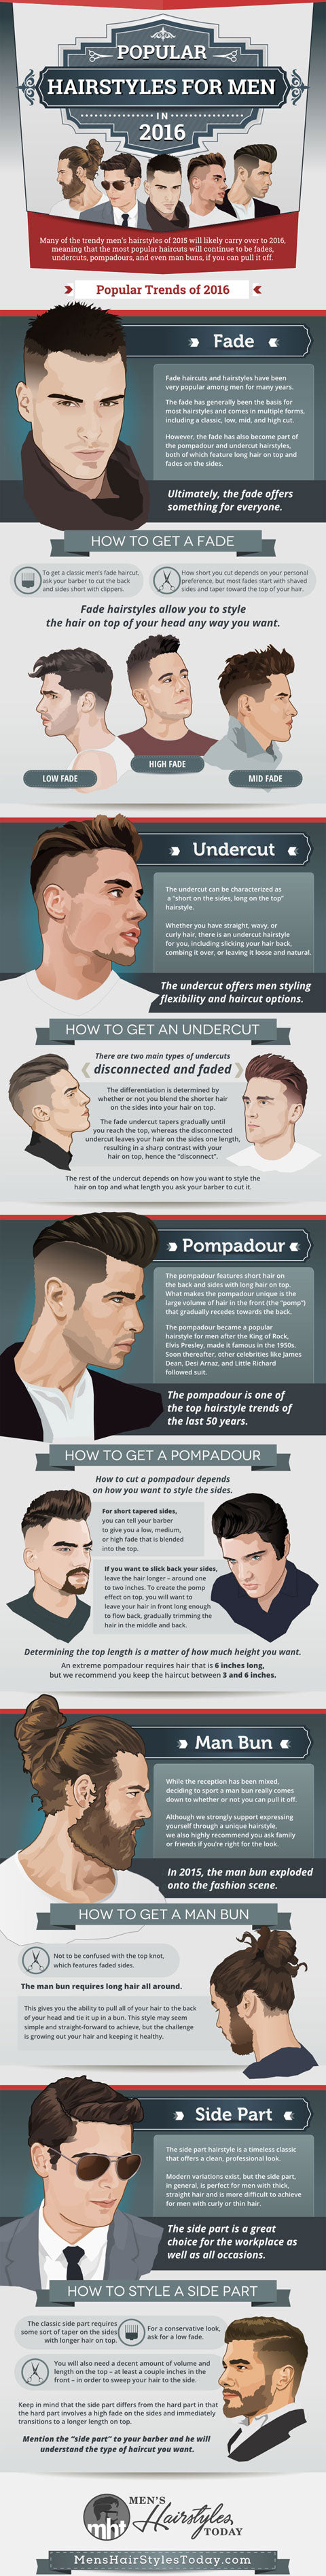 The iconic fade haircut: Timeless trend in men's hairstyling